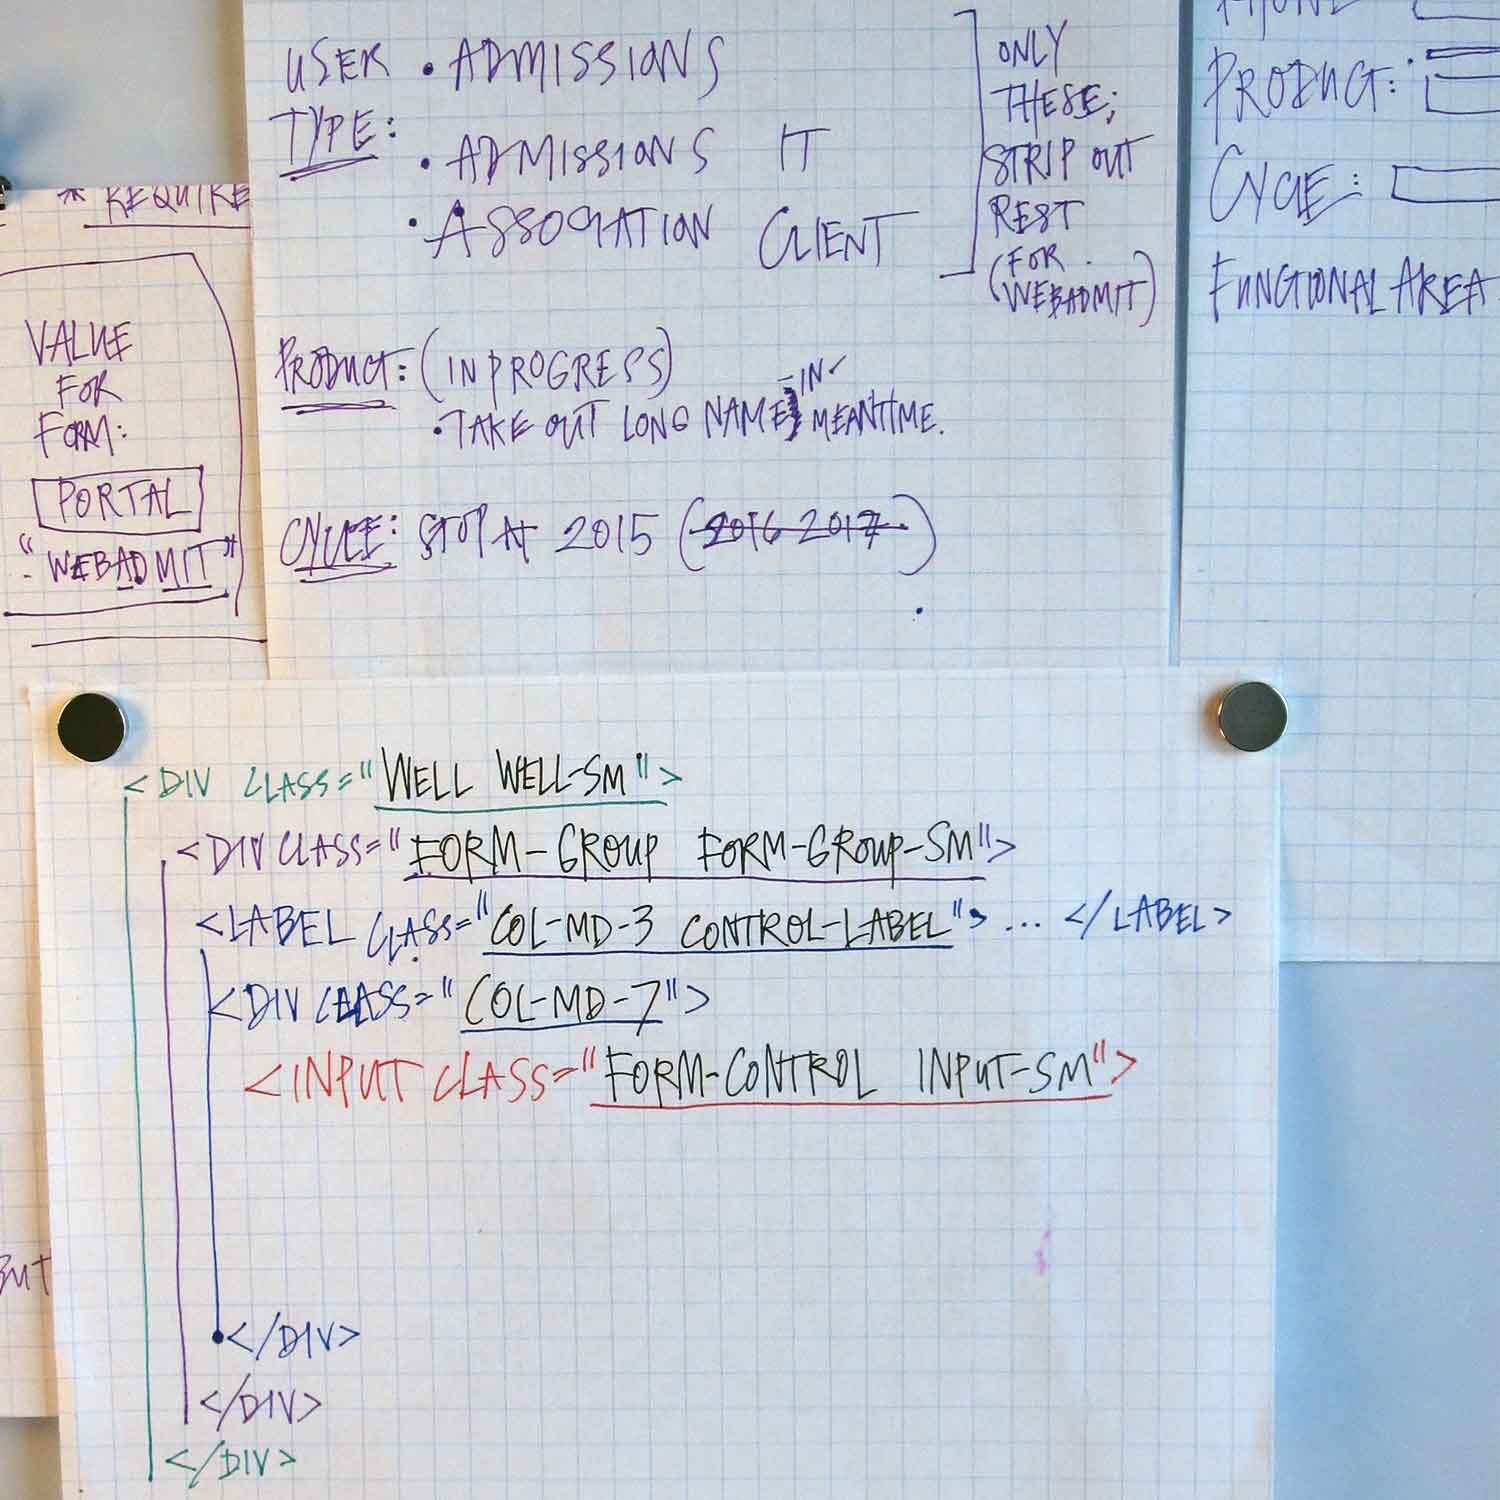 a photograph of some notes regarding the development of the Boston University Support Form for Liaison